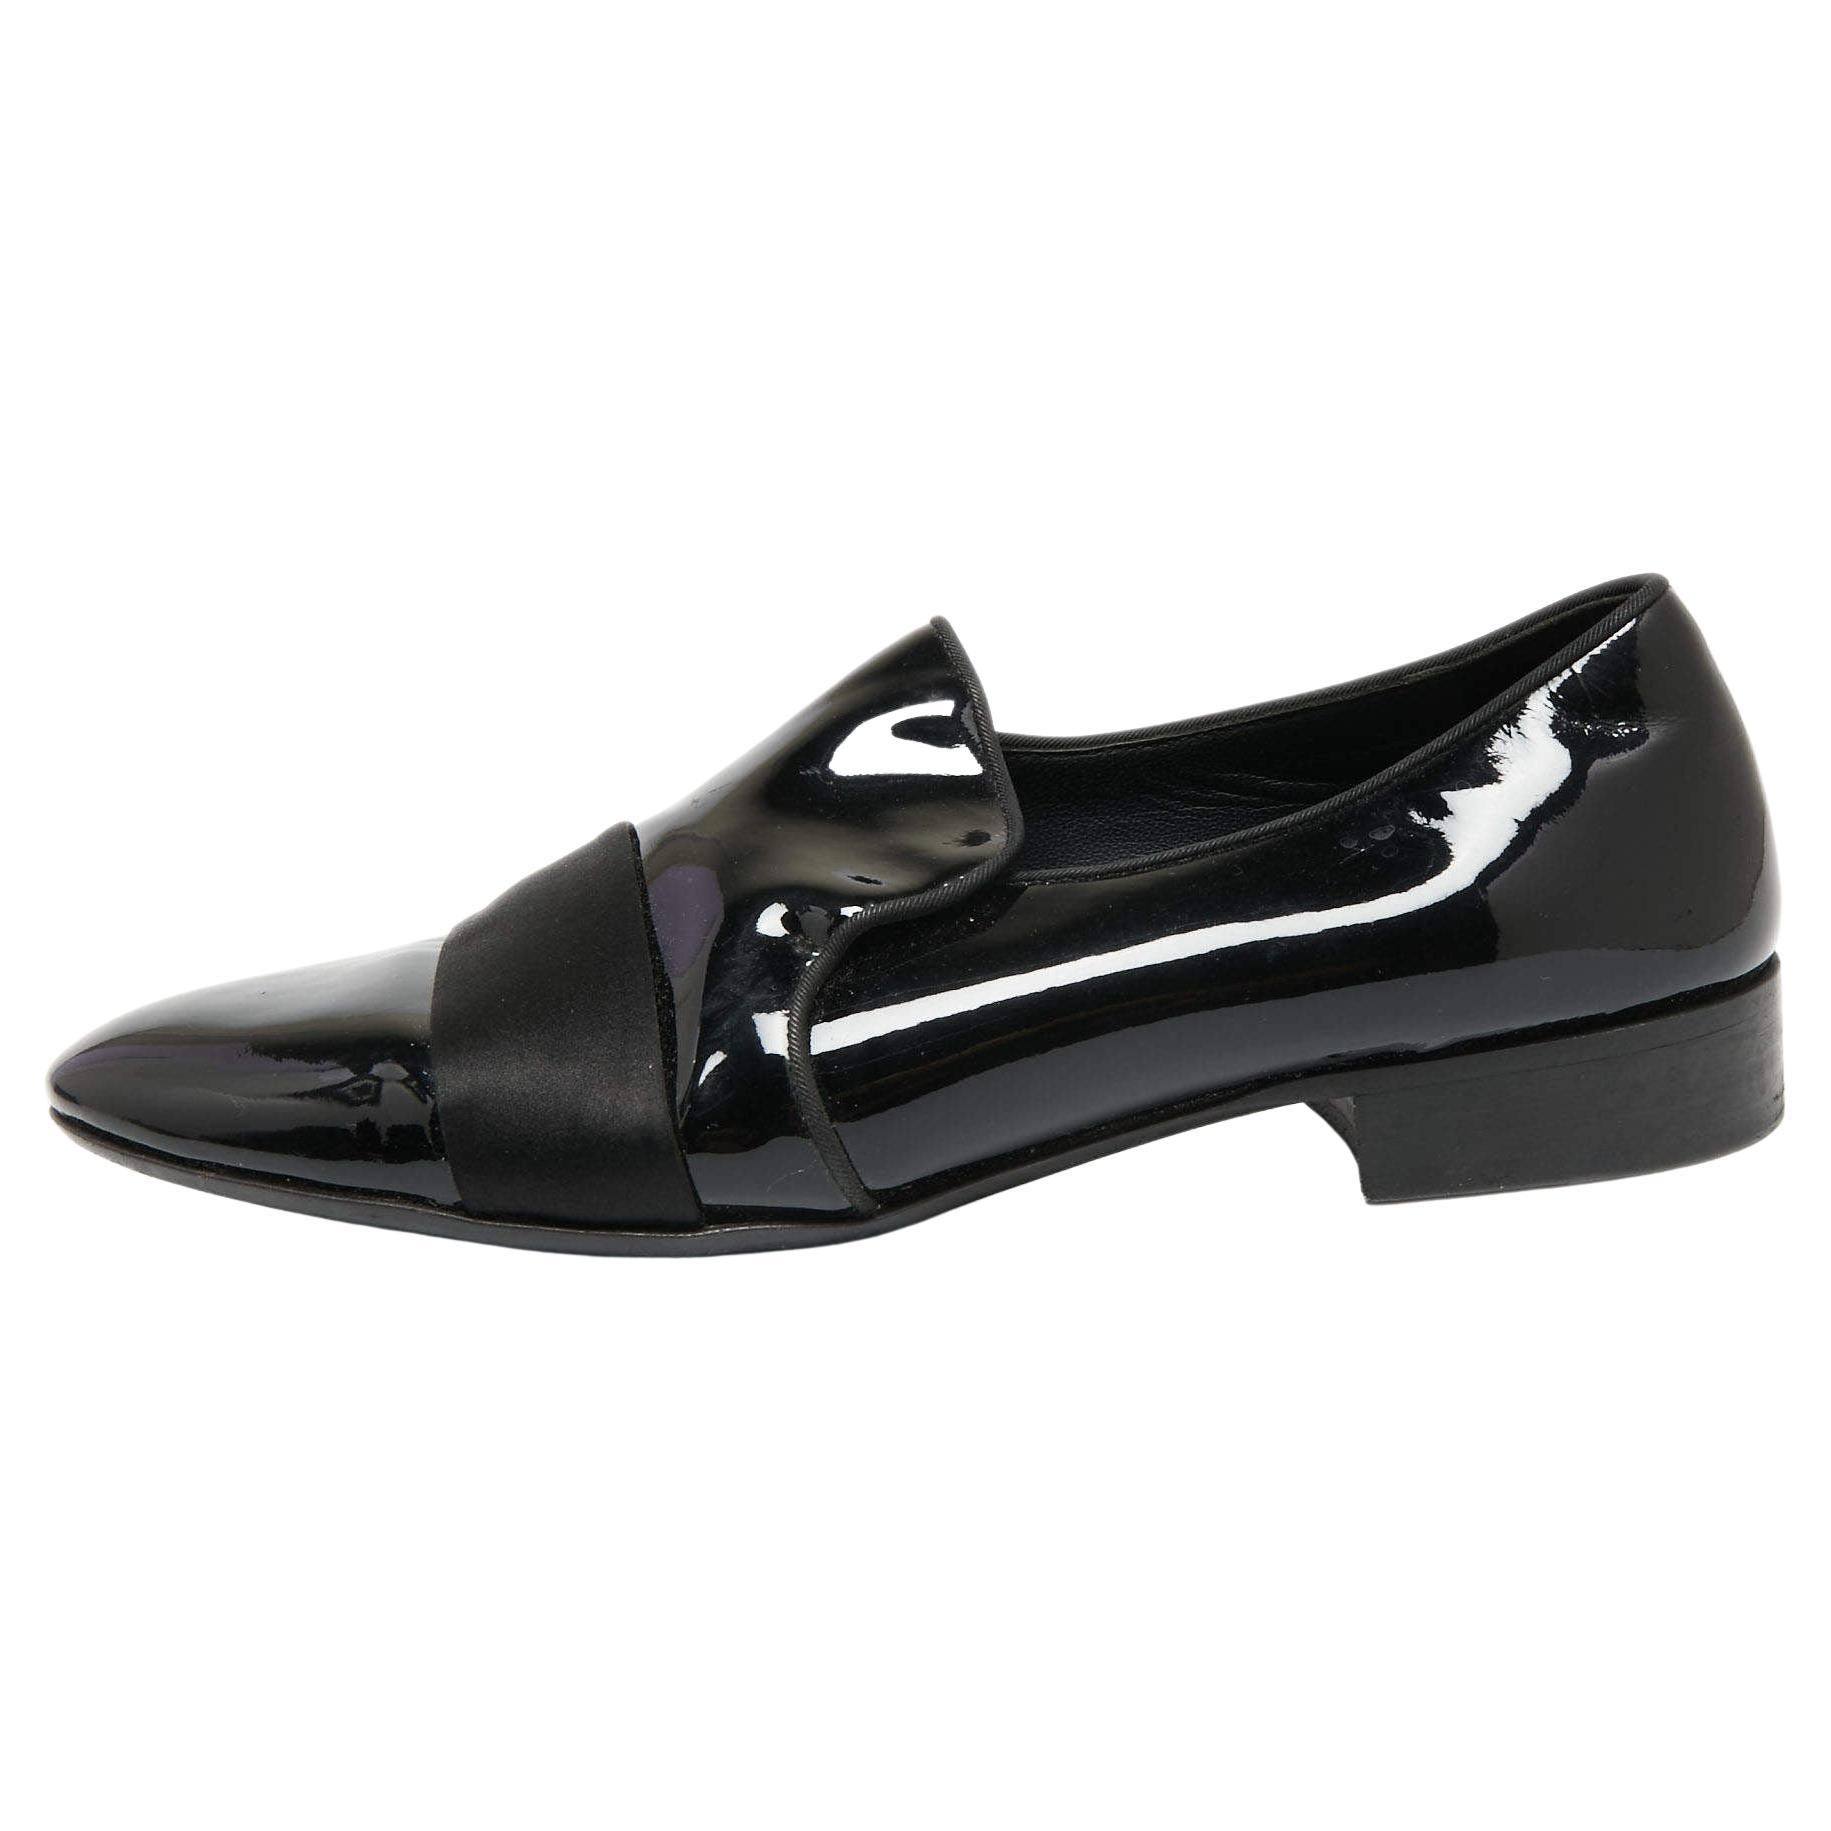 Giuseppe Zanotti Black Patent Leather and Satin Cap Toe Smoking Slippers Size 40 For Sale